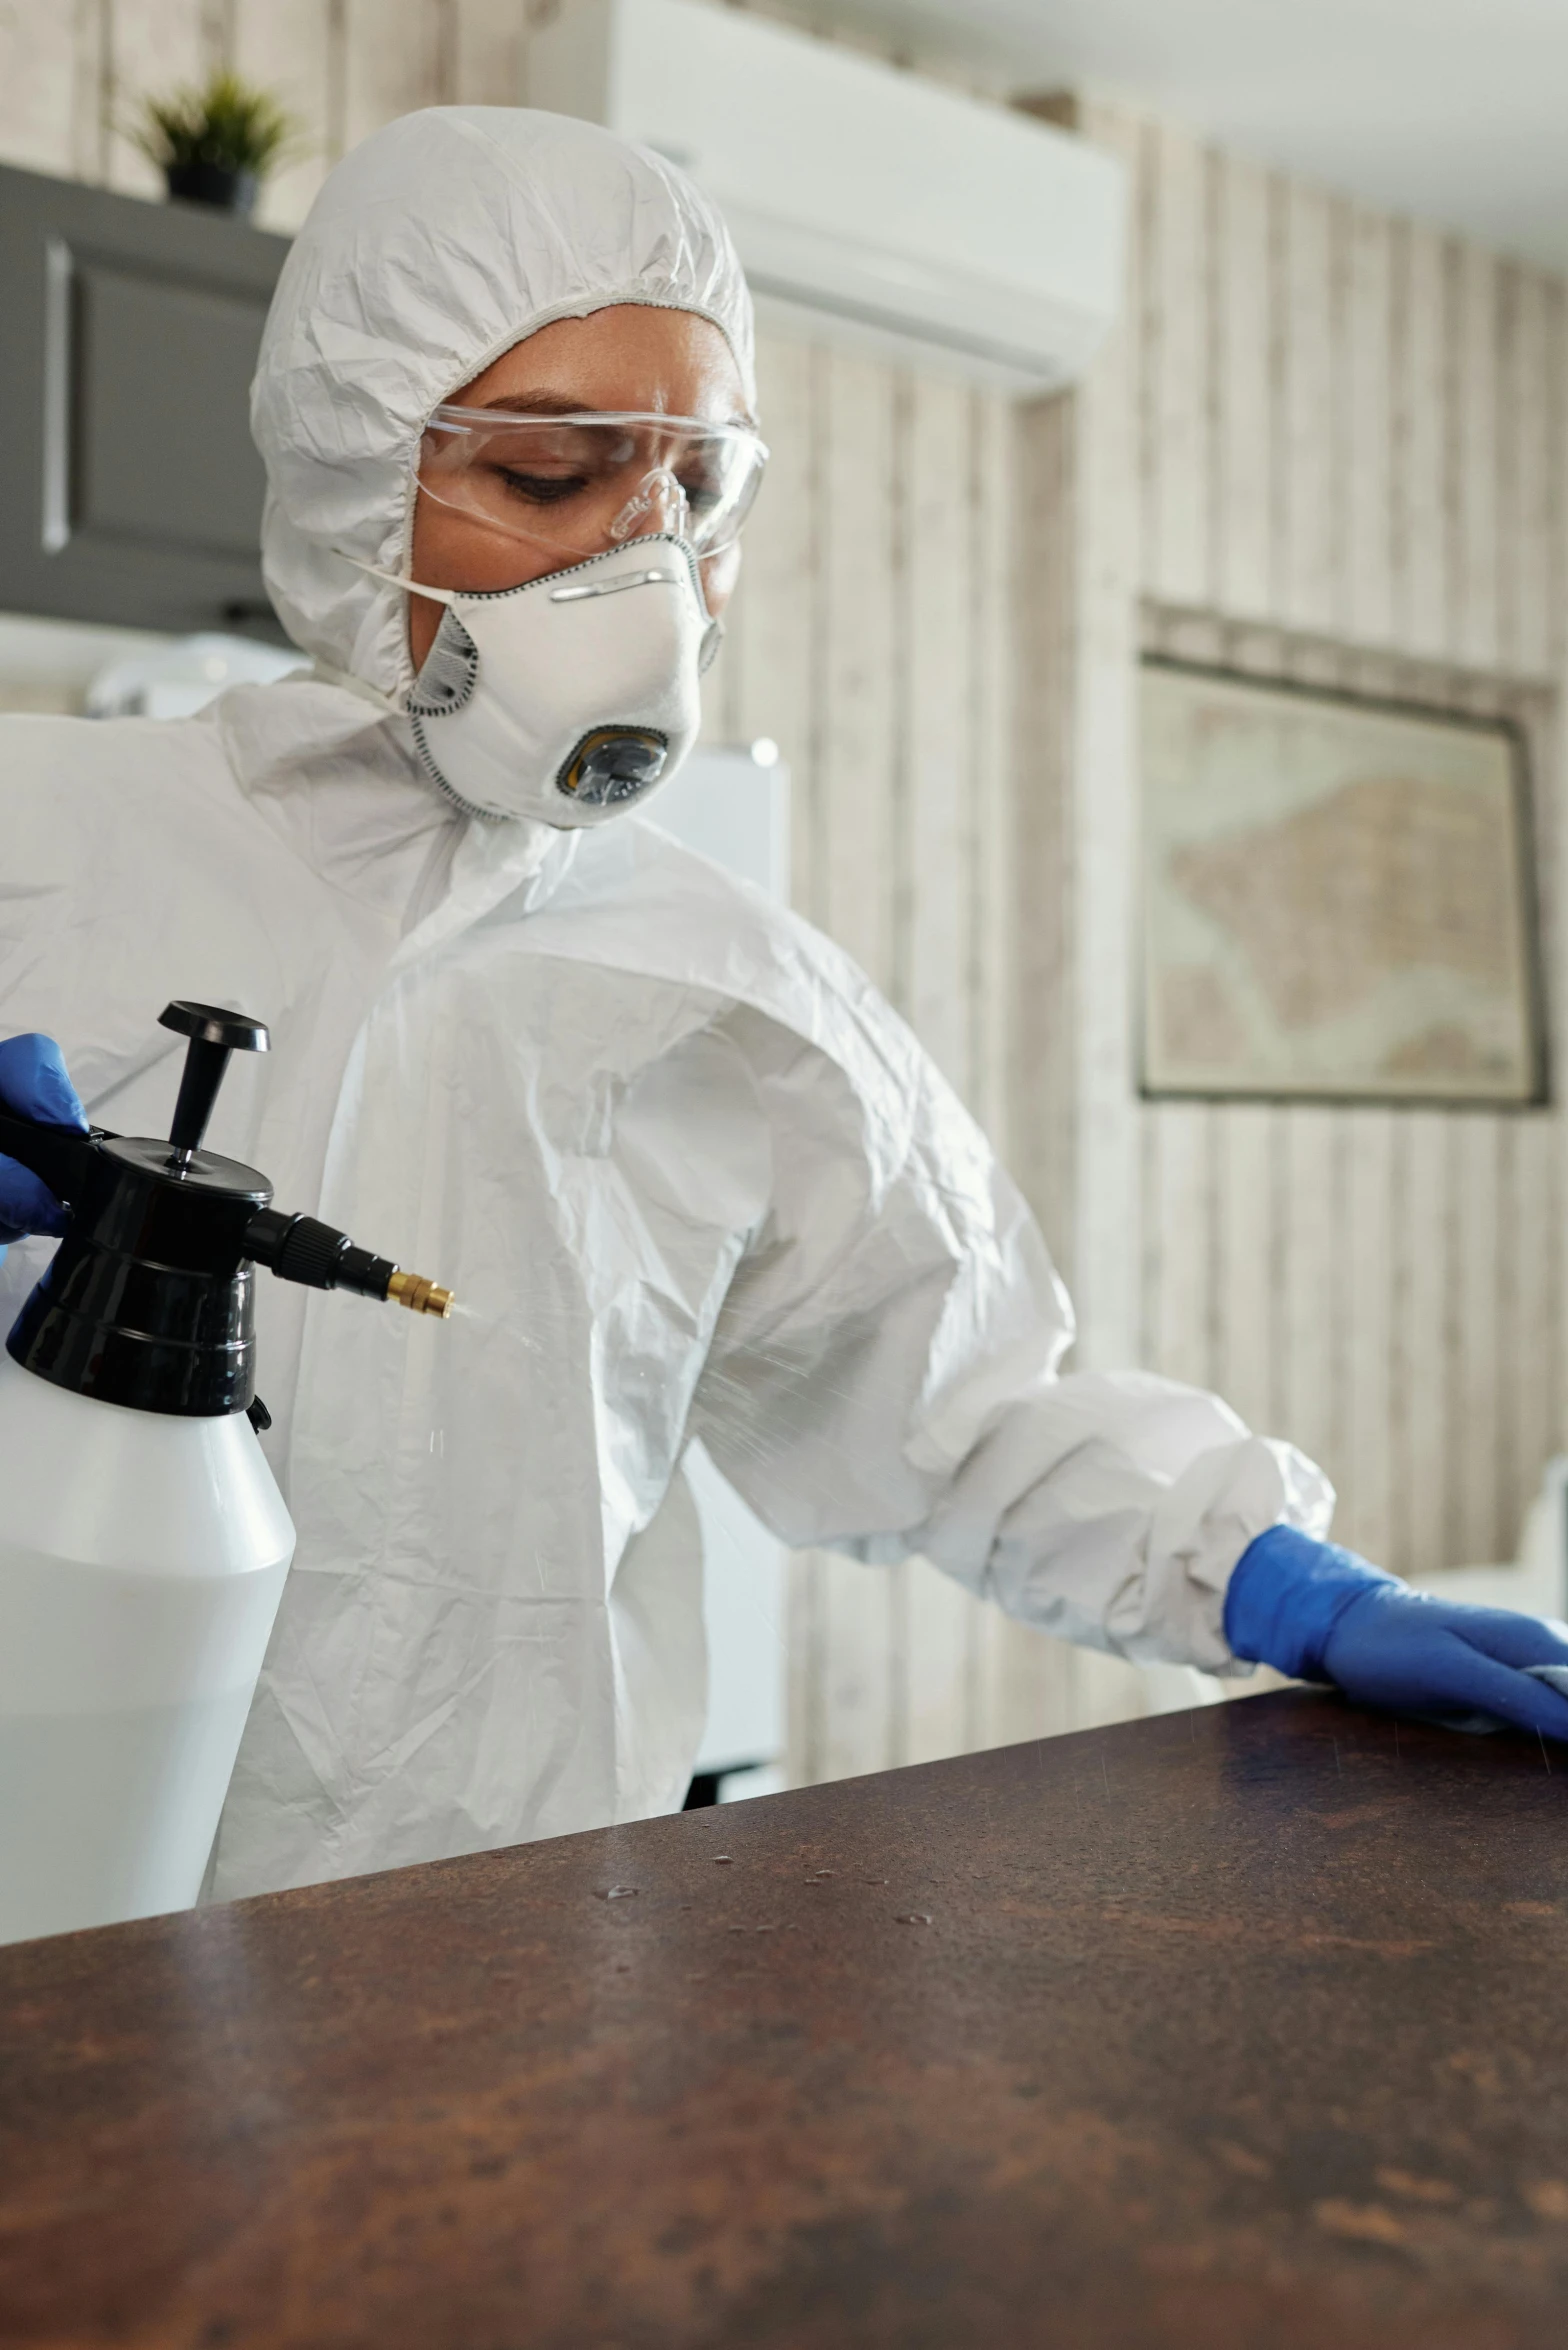 a man in a hazmat suit sprays down a table, a portrait, shutterstock, brown, 4l, domestic, wearing lab coat and a blouse